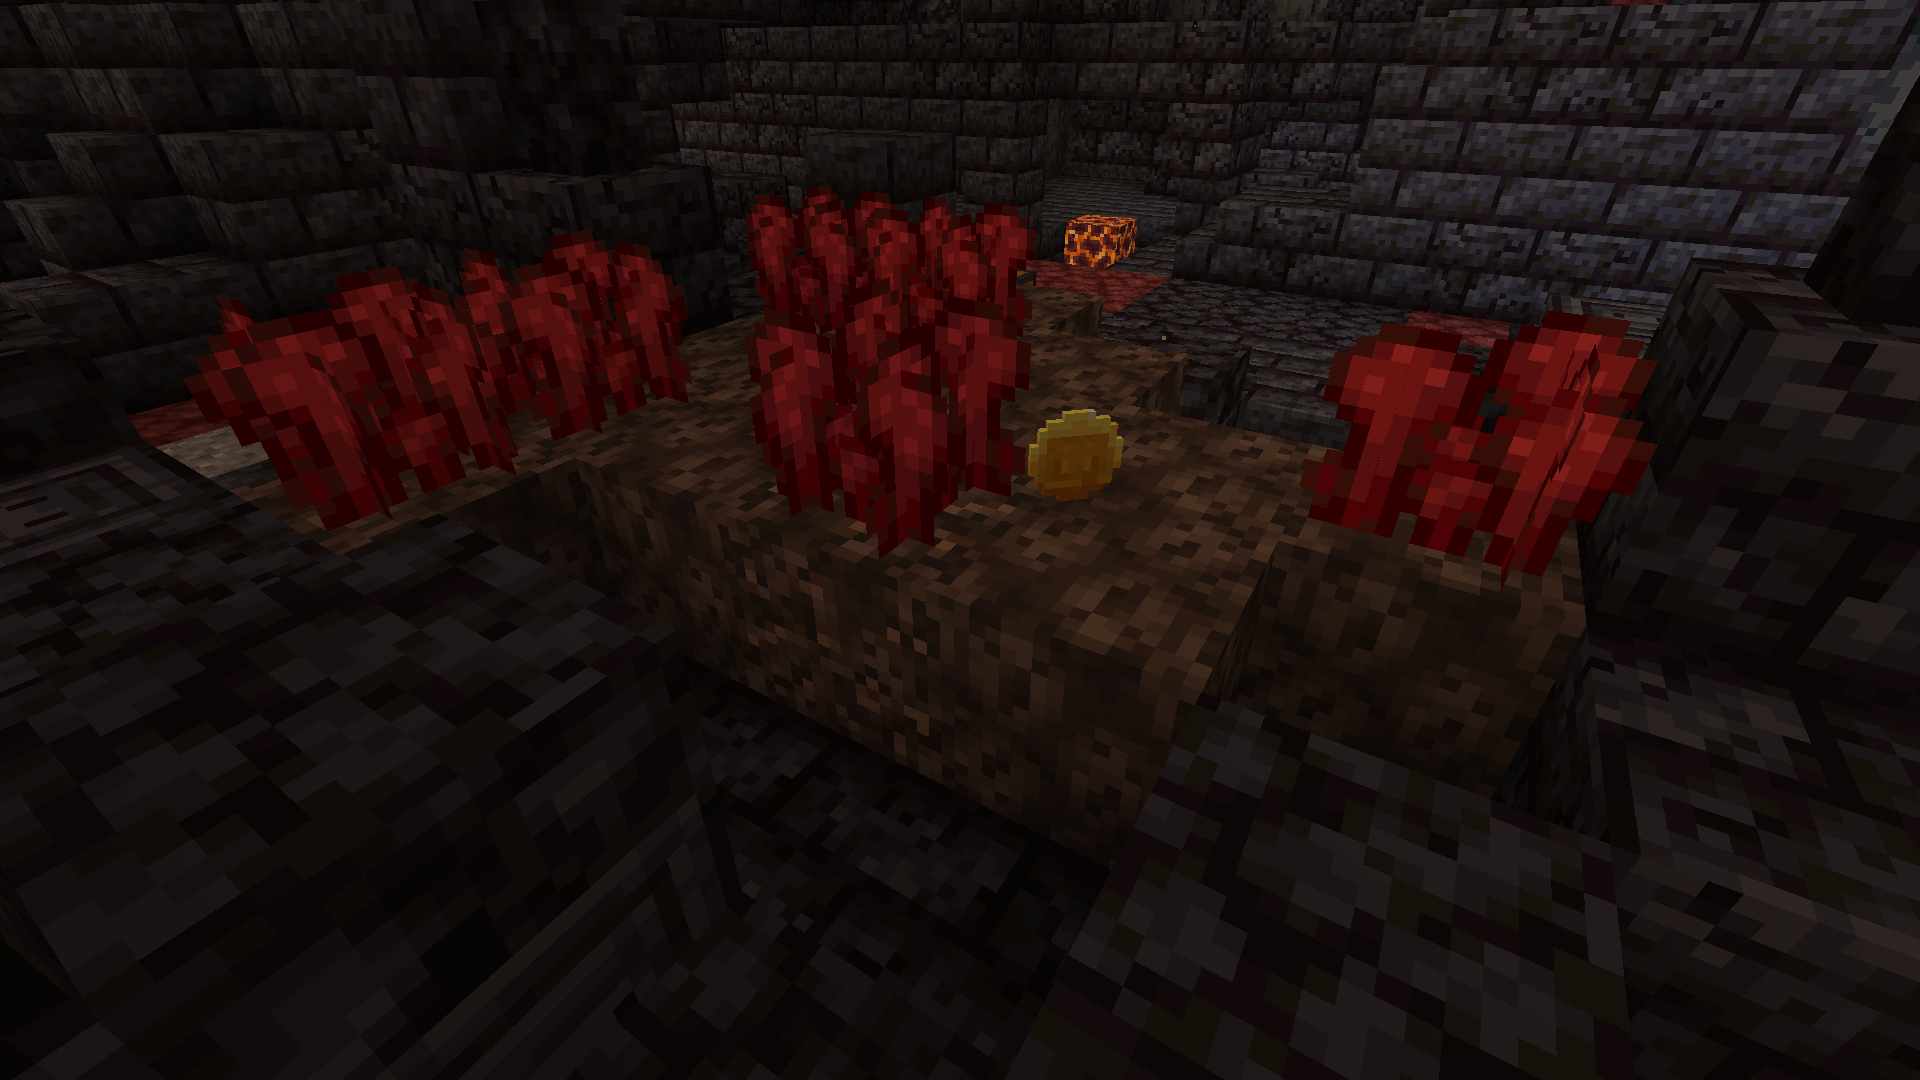 A piglin coin beside some nether wart growing on suspicious sand in a bastion